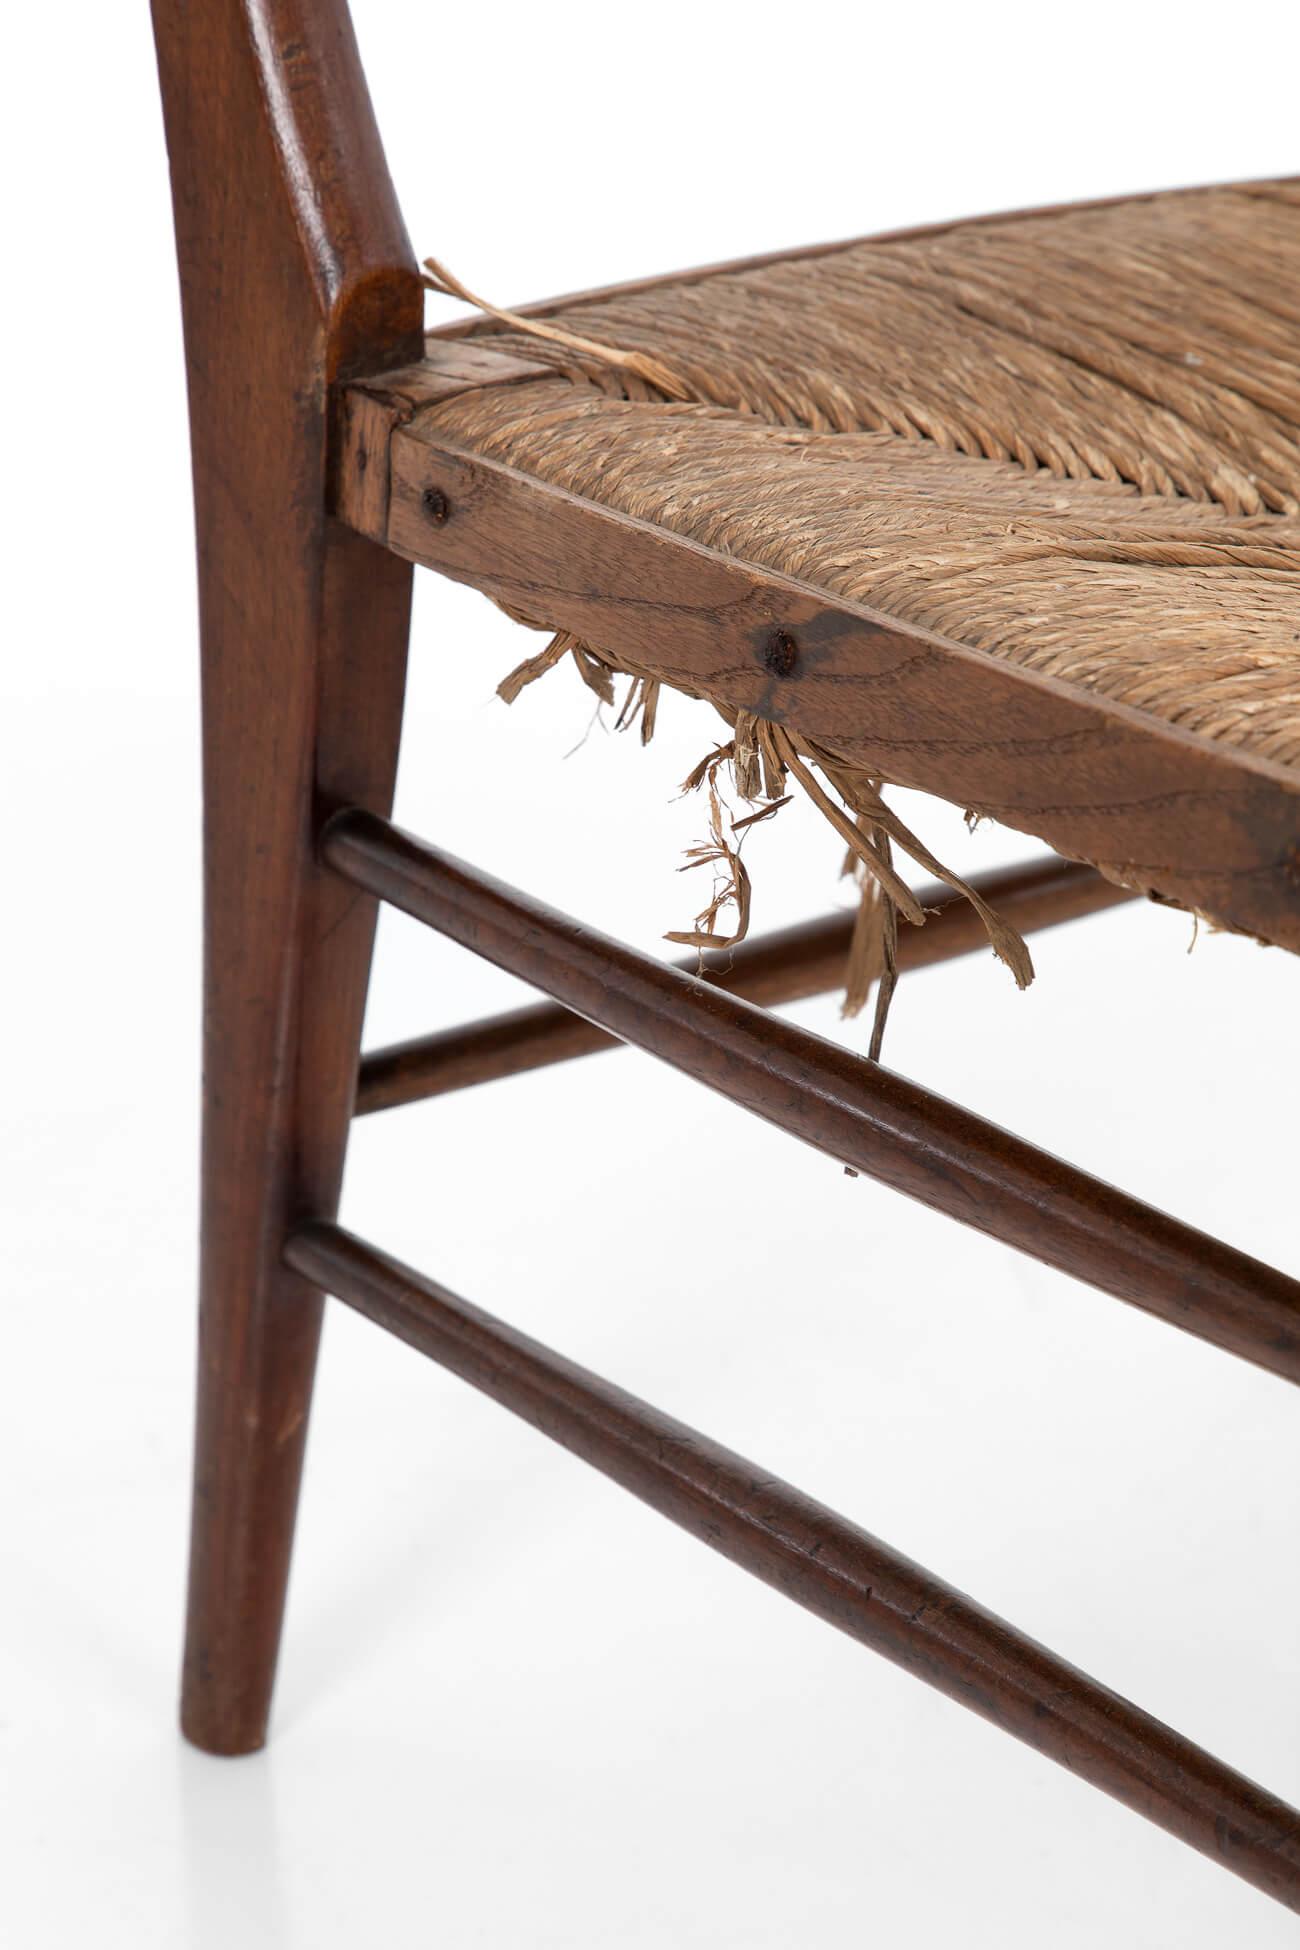 19th Century Aesthetic Movement Side Chair in Walnut by E.W. Godwin, circa 1885 For Sale